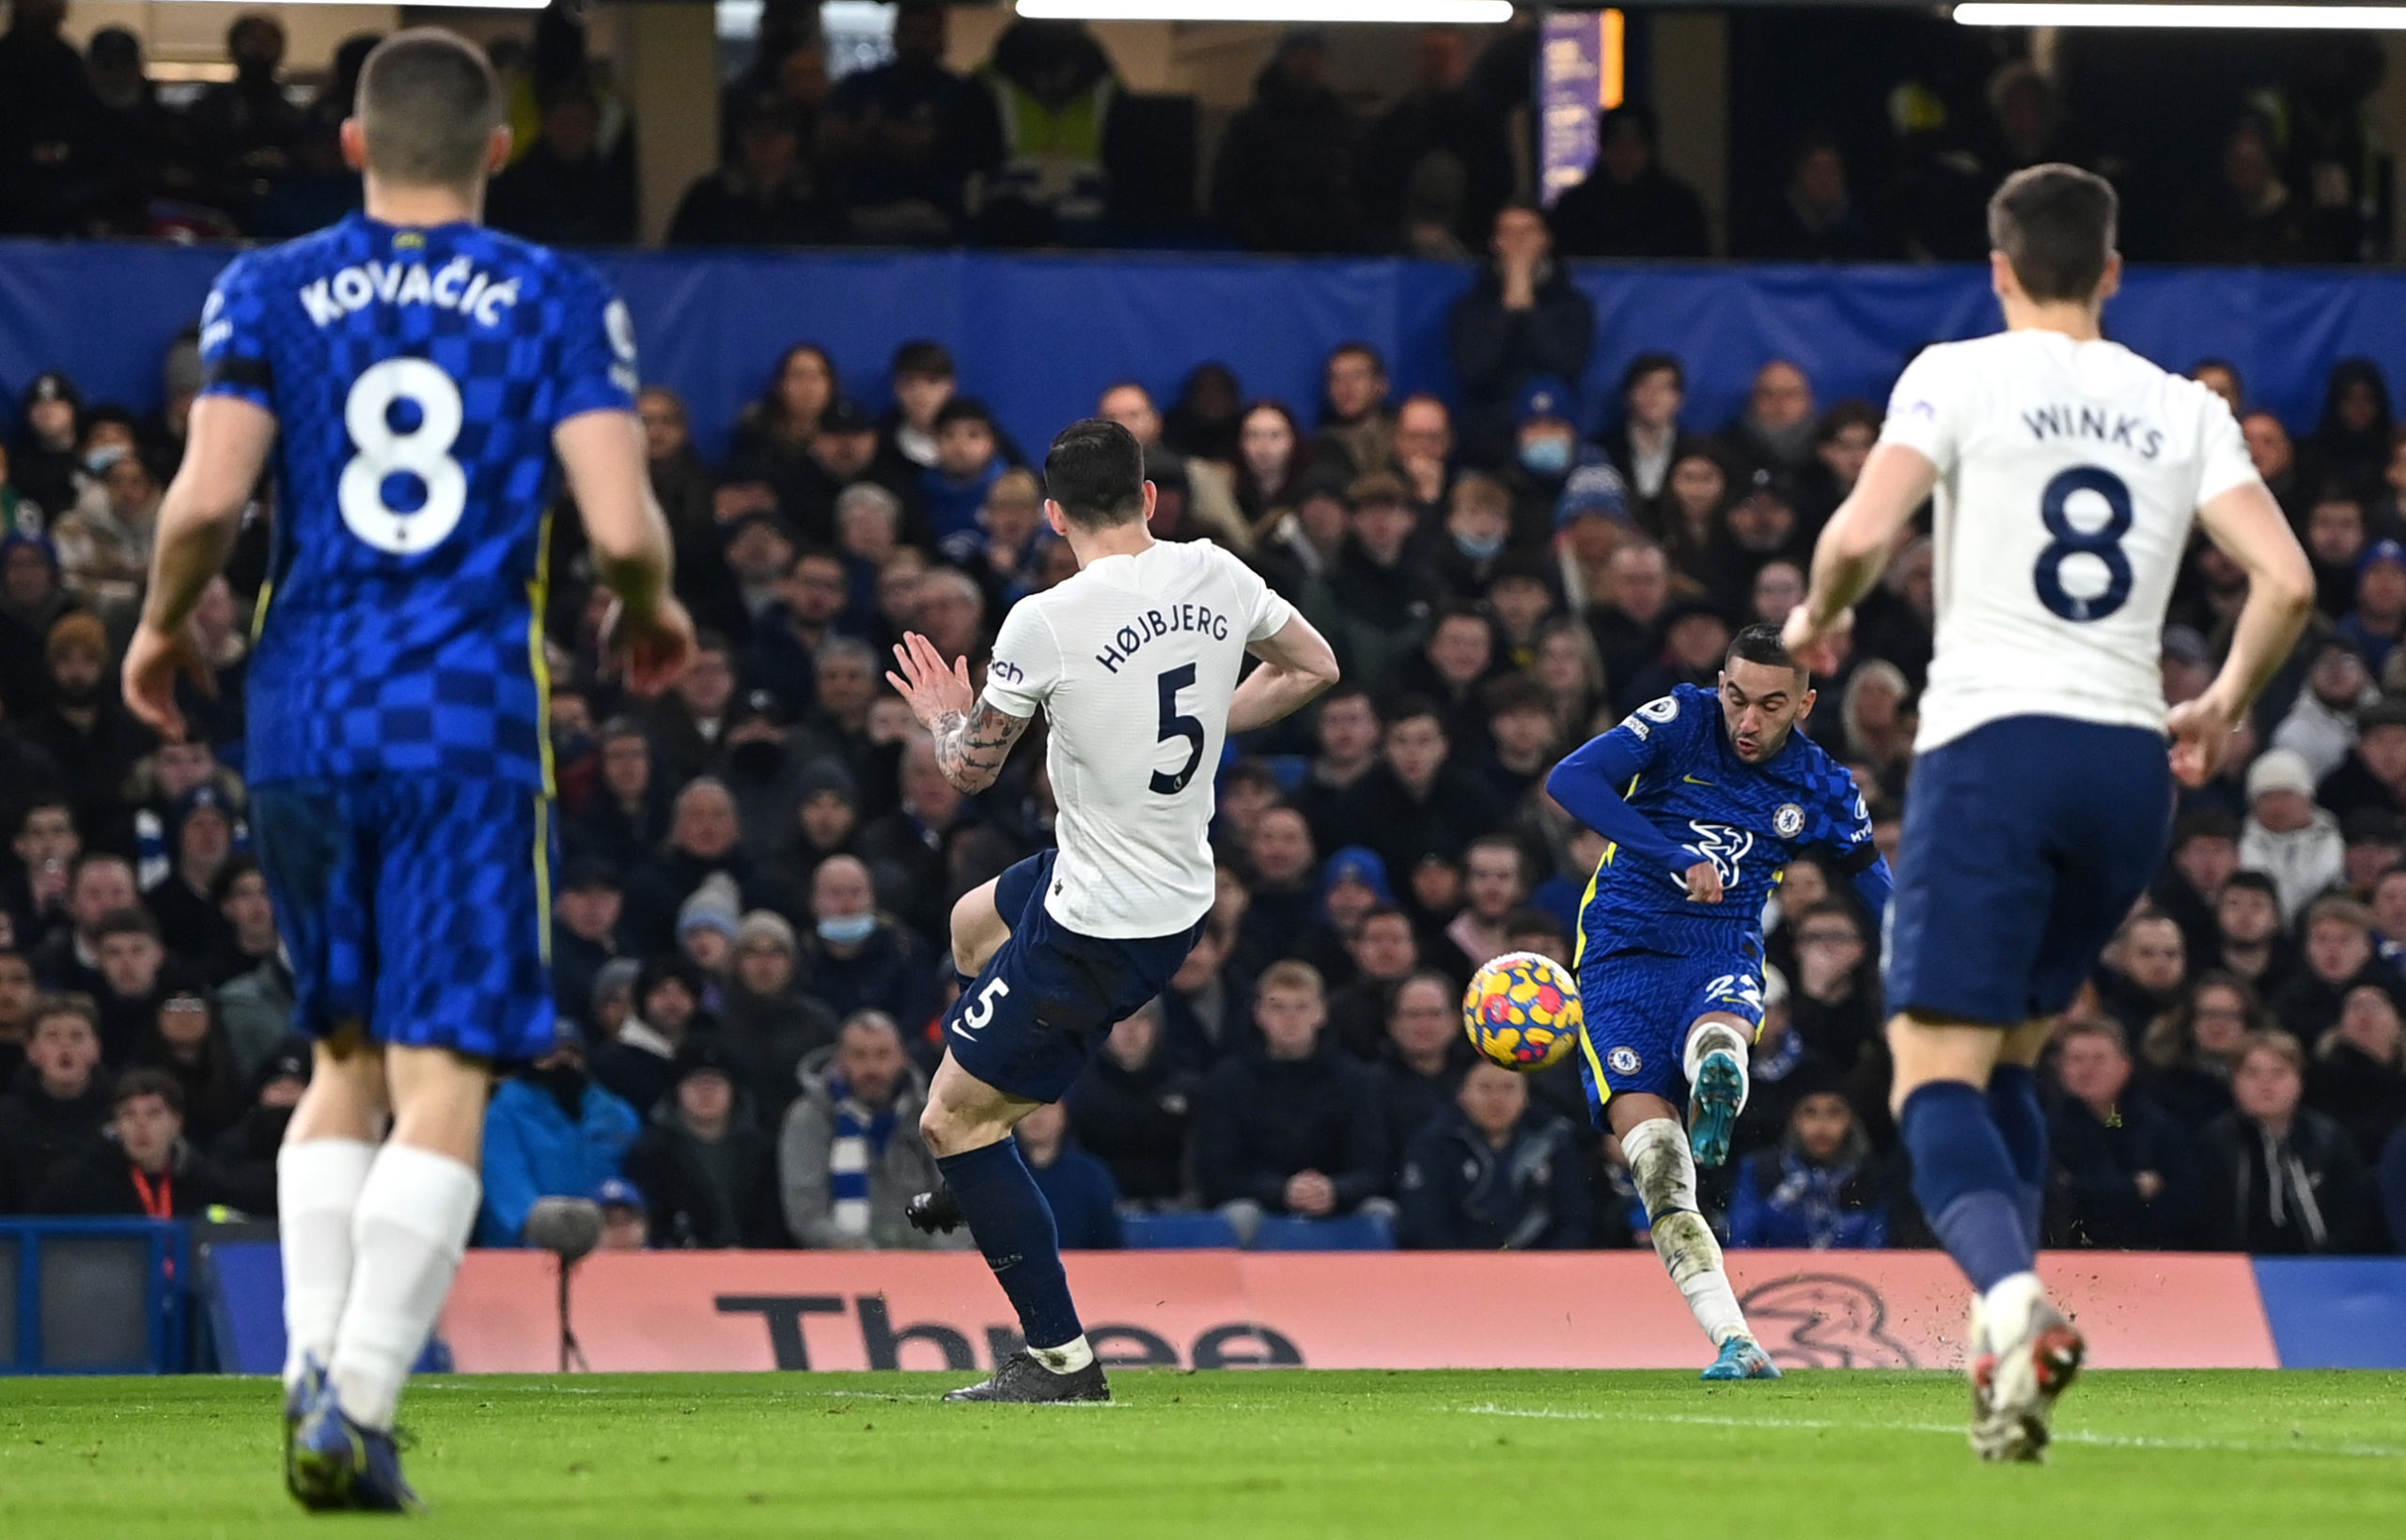 Pat Nevin says Chelsea player 'looked like a different person' in Tottenham win